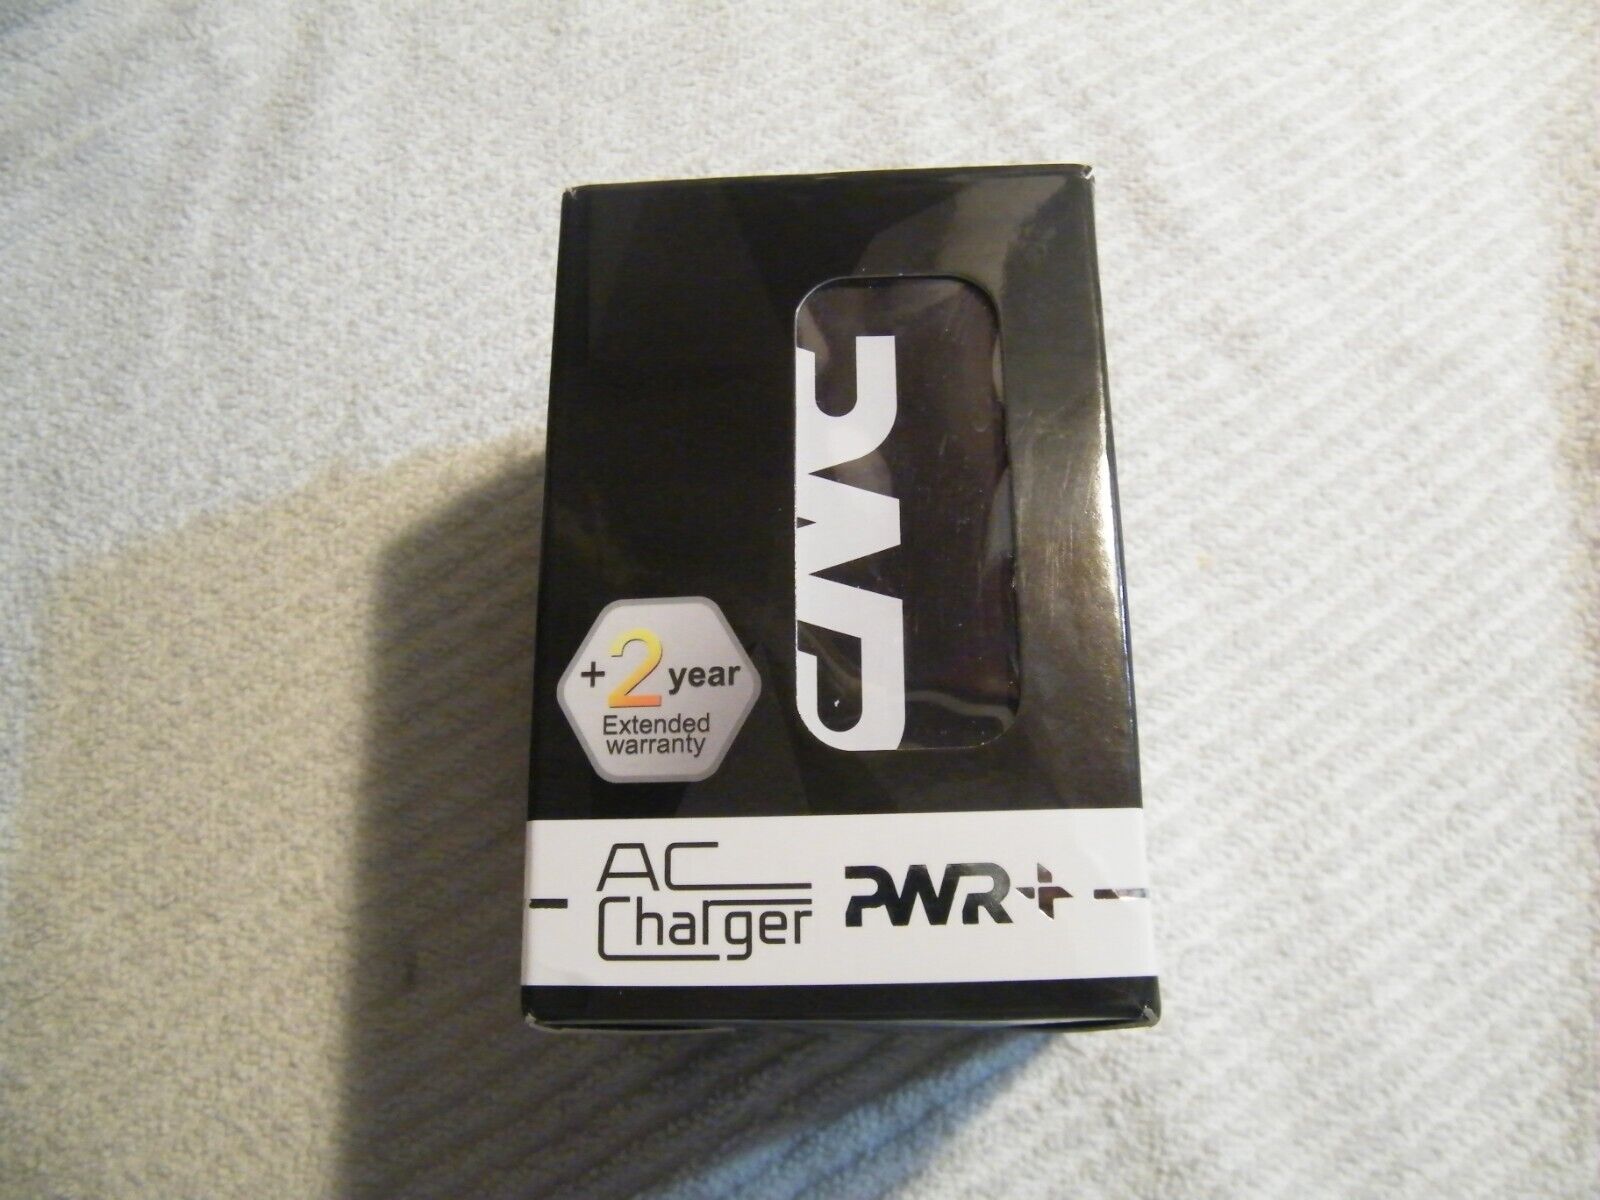 AC CHARGER  PWR+